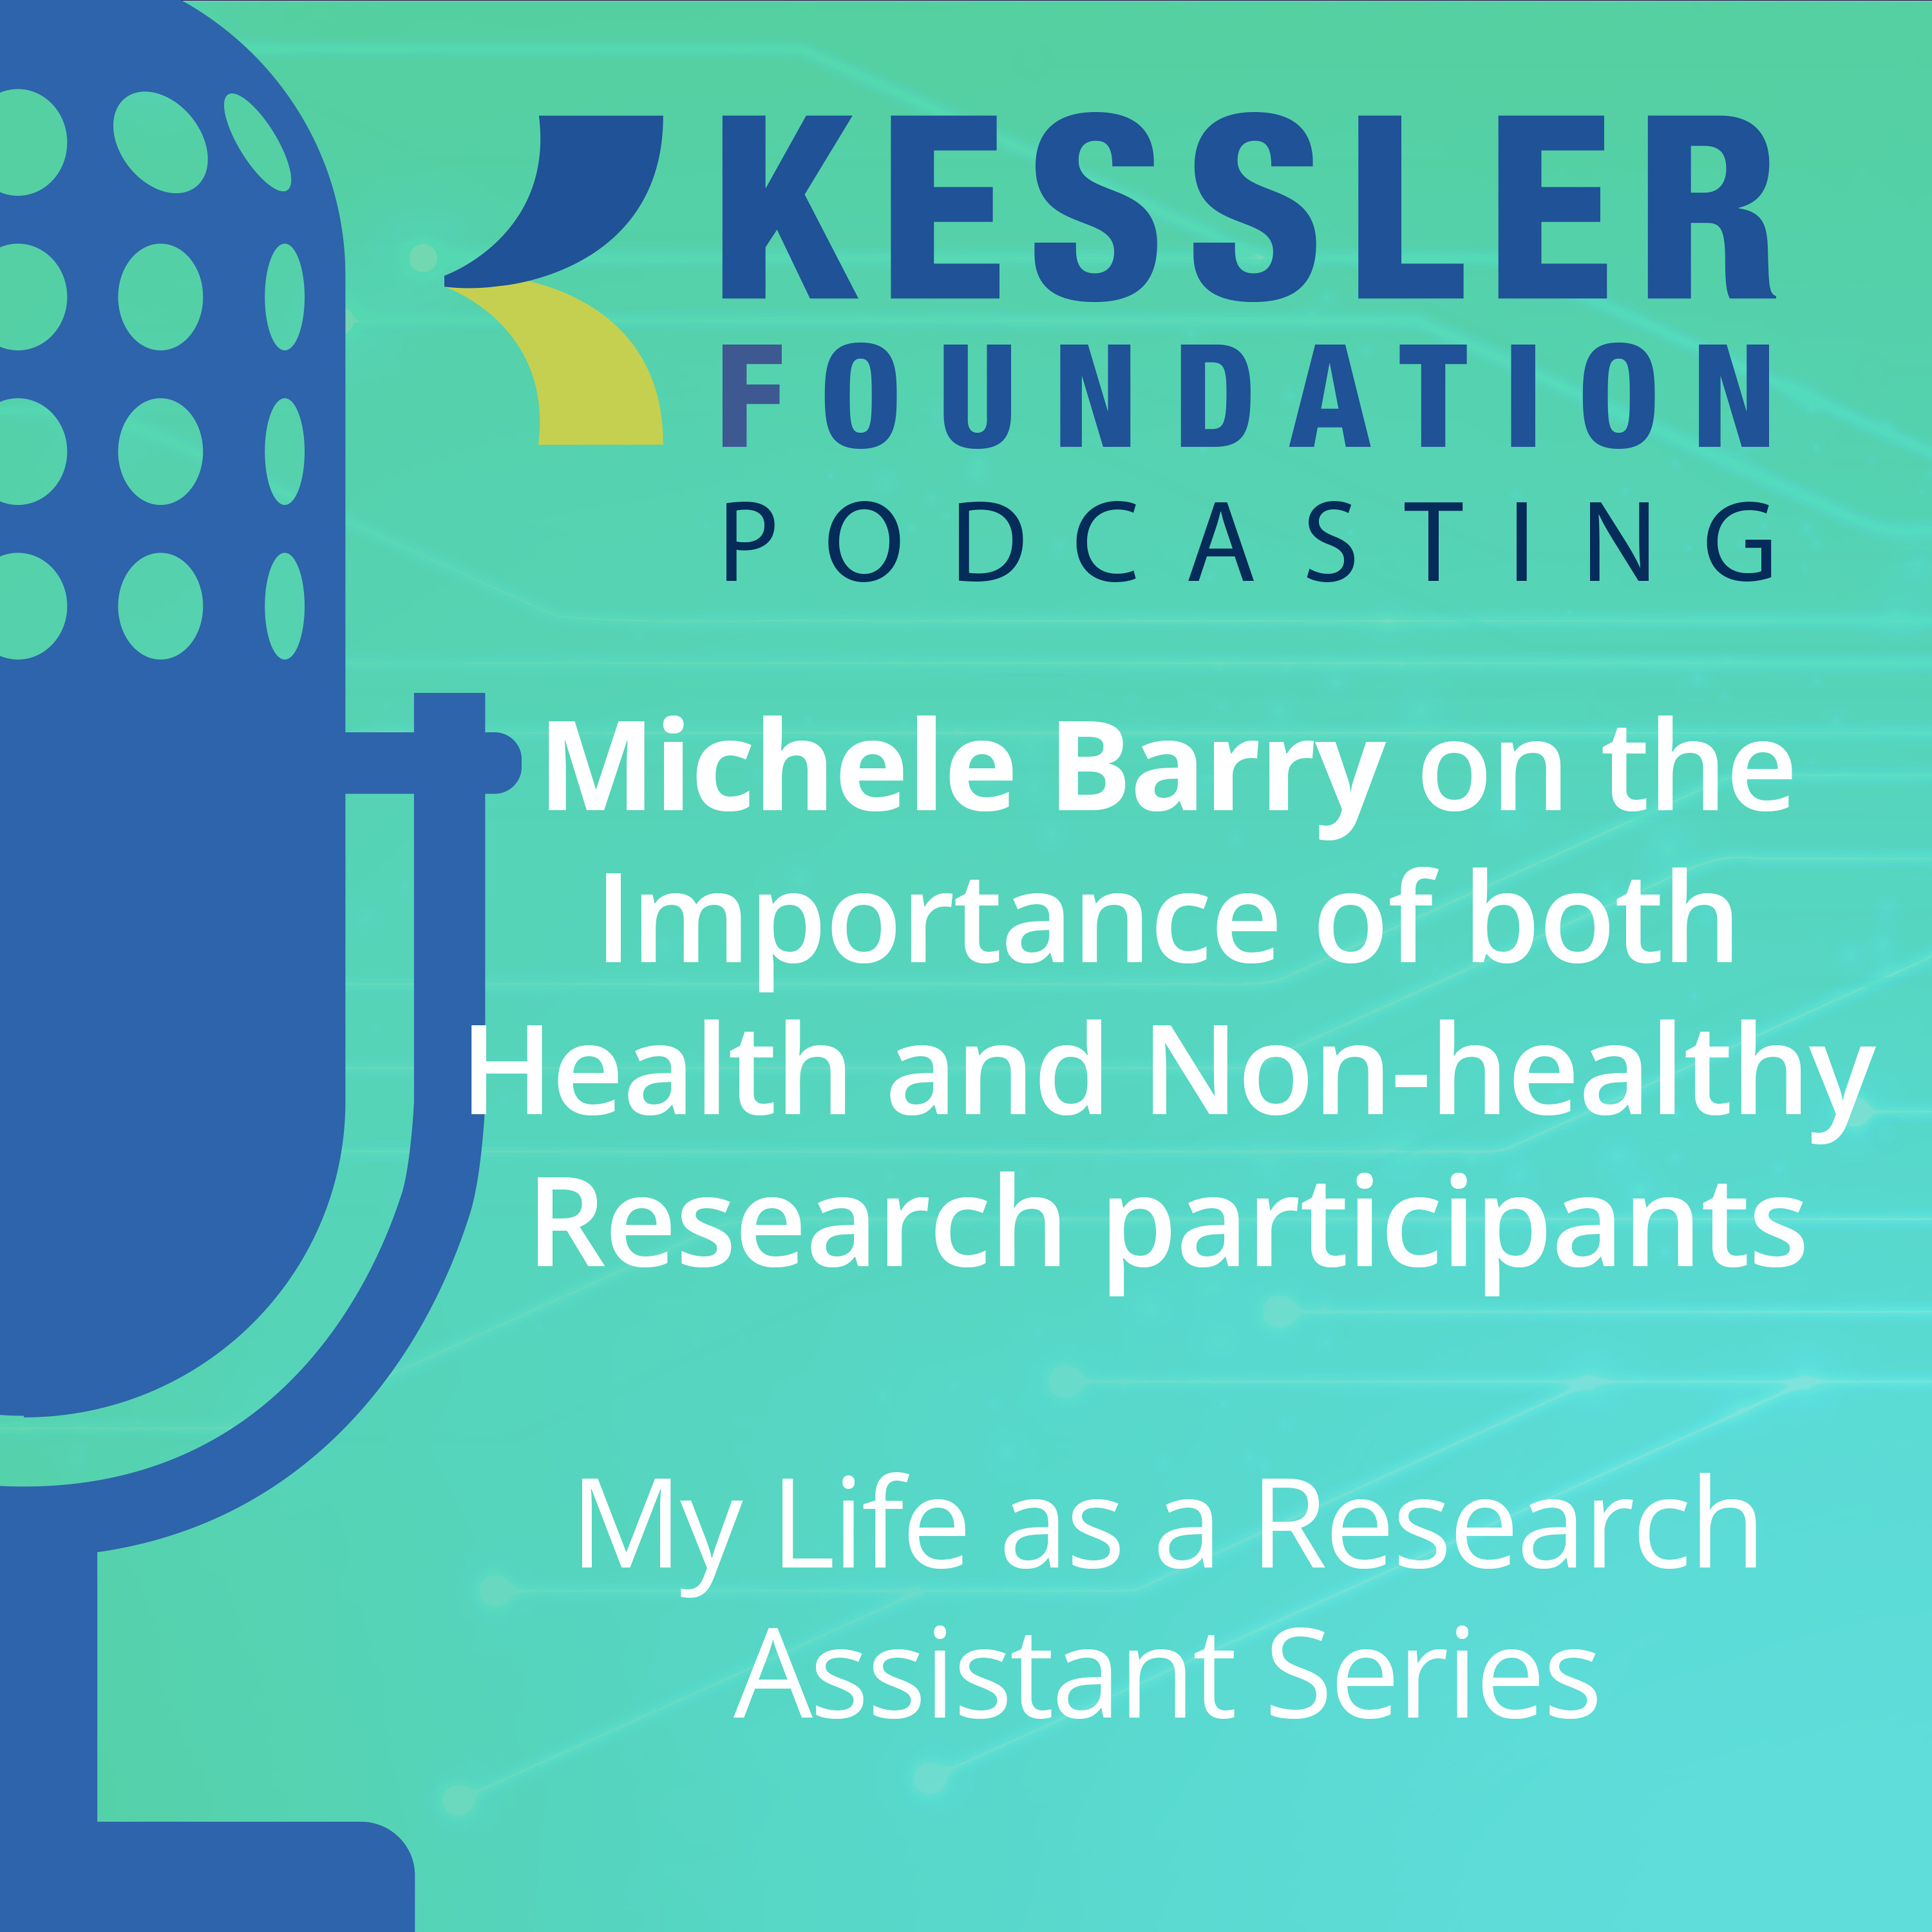 Michele Barry on the Importance of Recruiting Research Participants with and without Disabilities